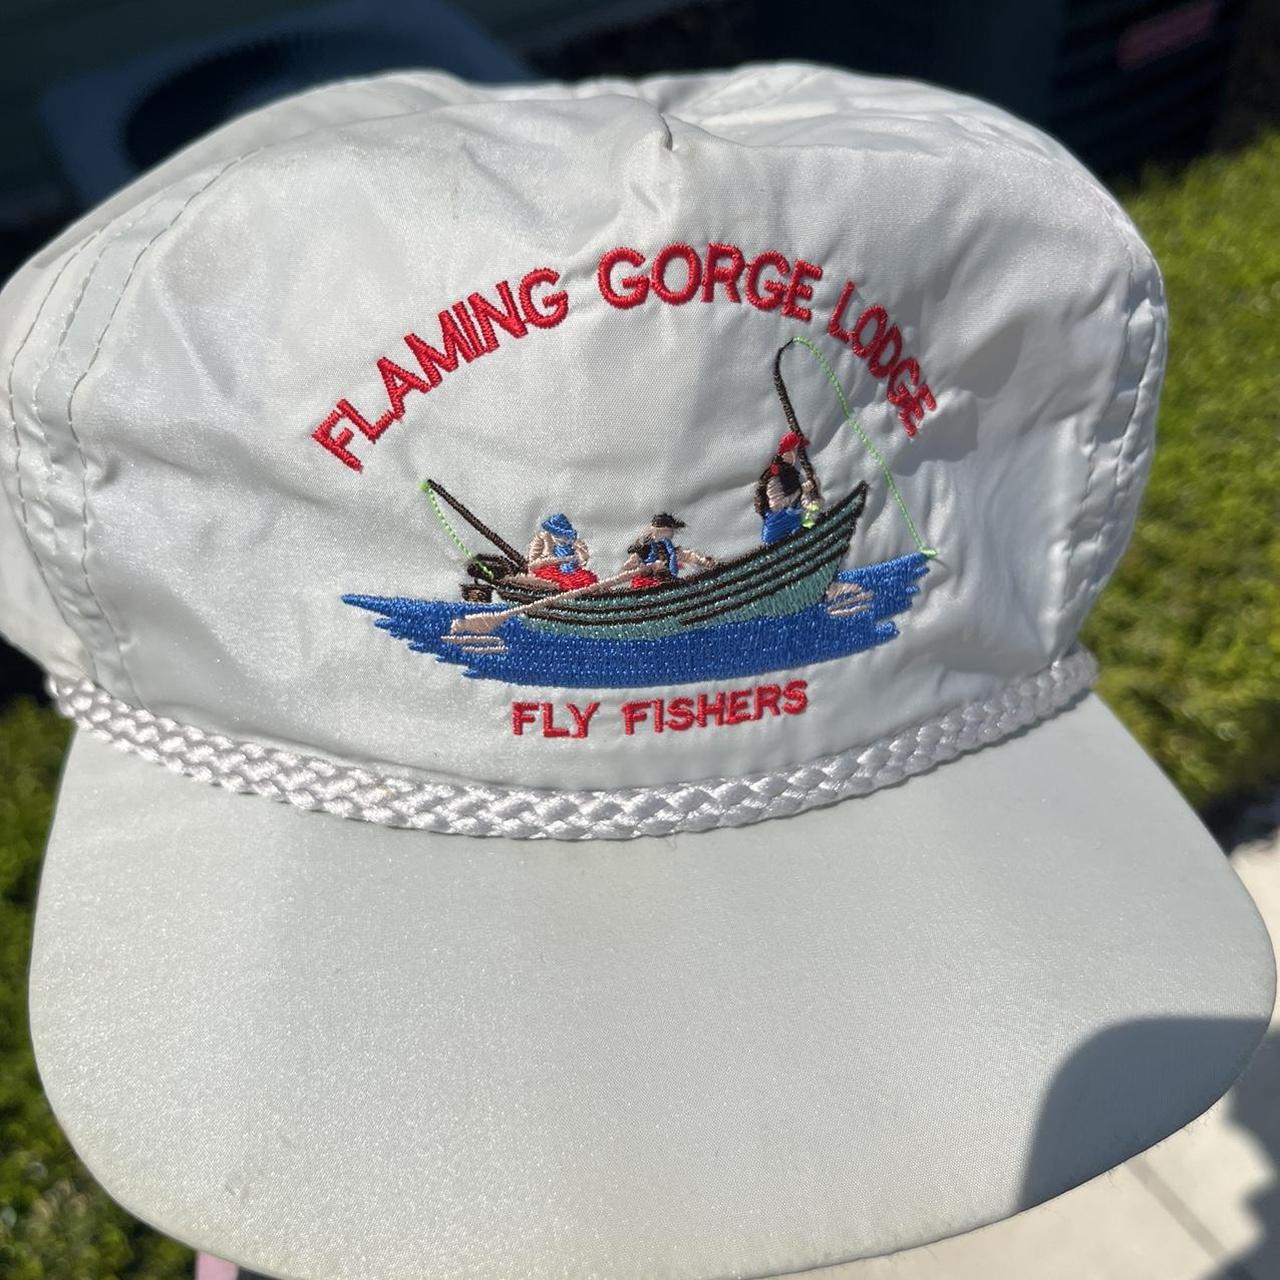 Flaming Gorge Lodge Vintage Fly Fishing Hat, Not bad